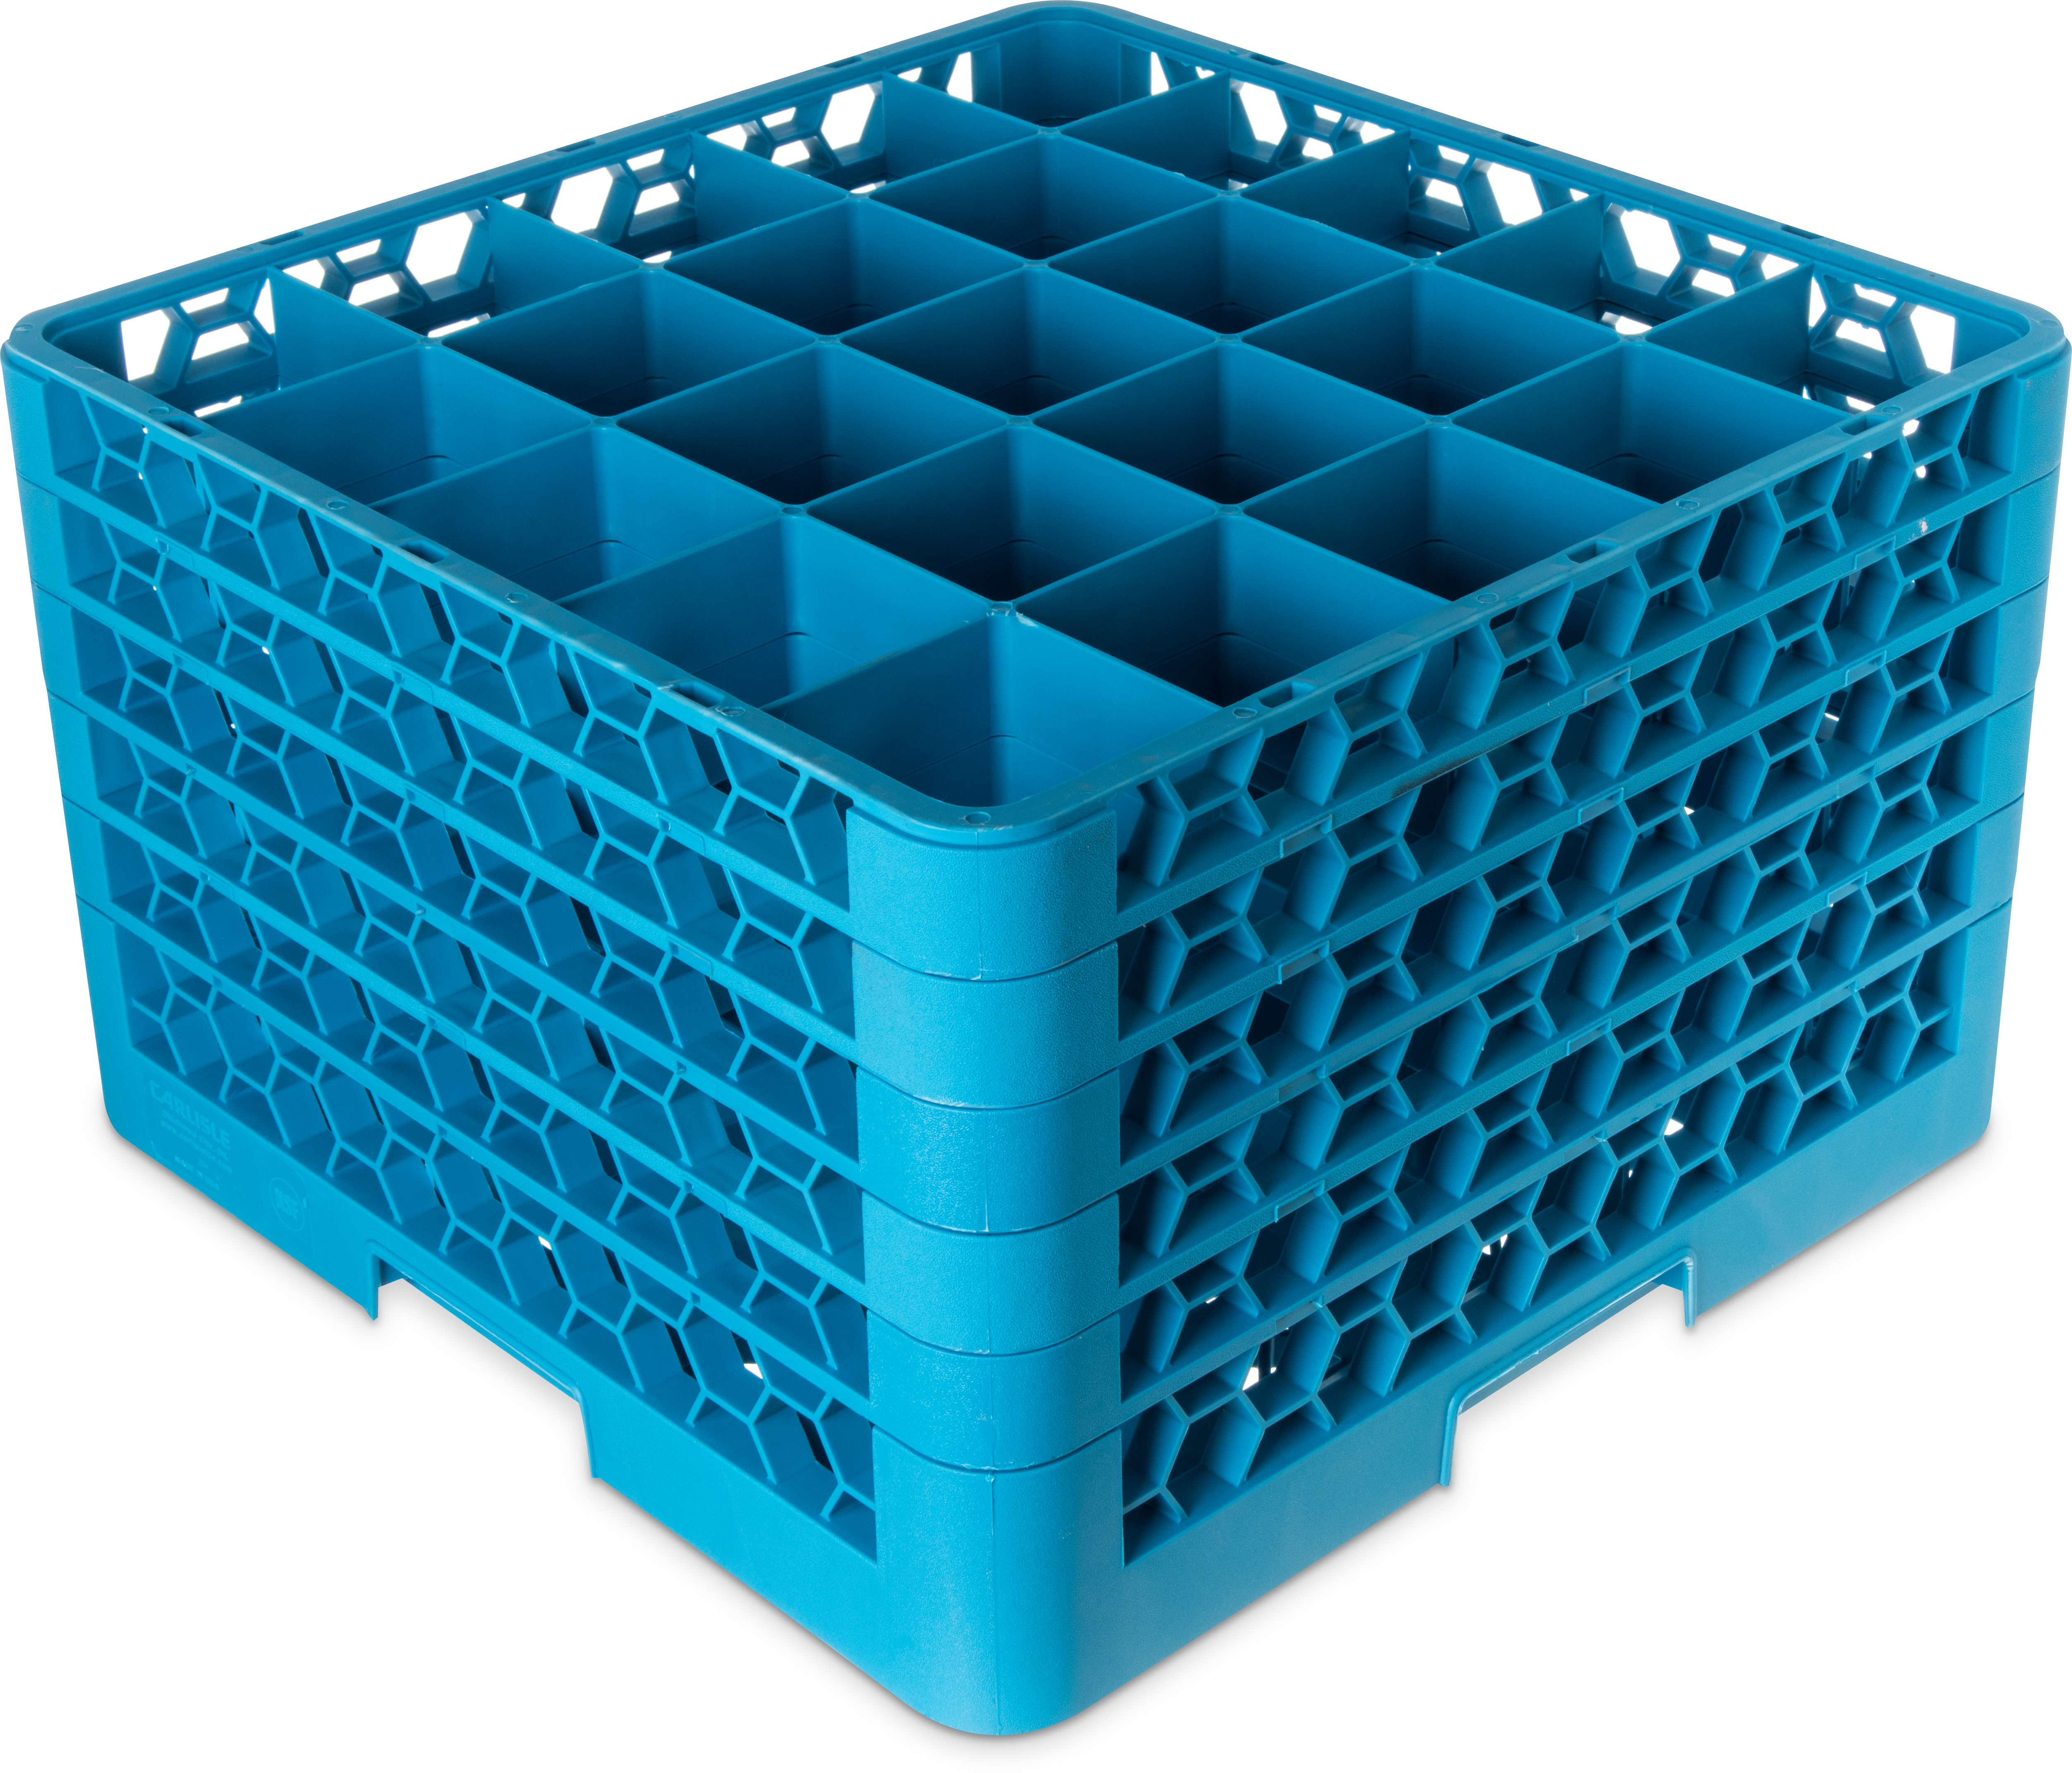 25 Compartment Glass Rack with 5 Extenders 11.9 - Carlisle Blue